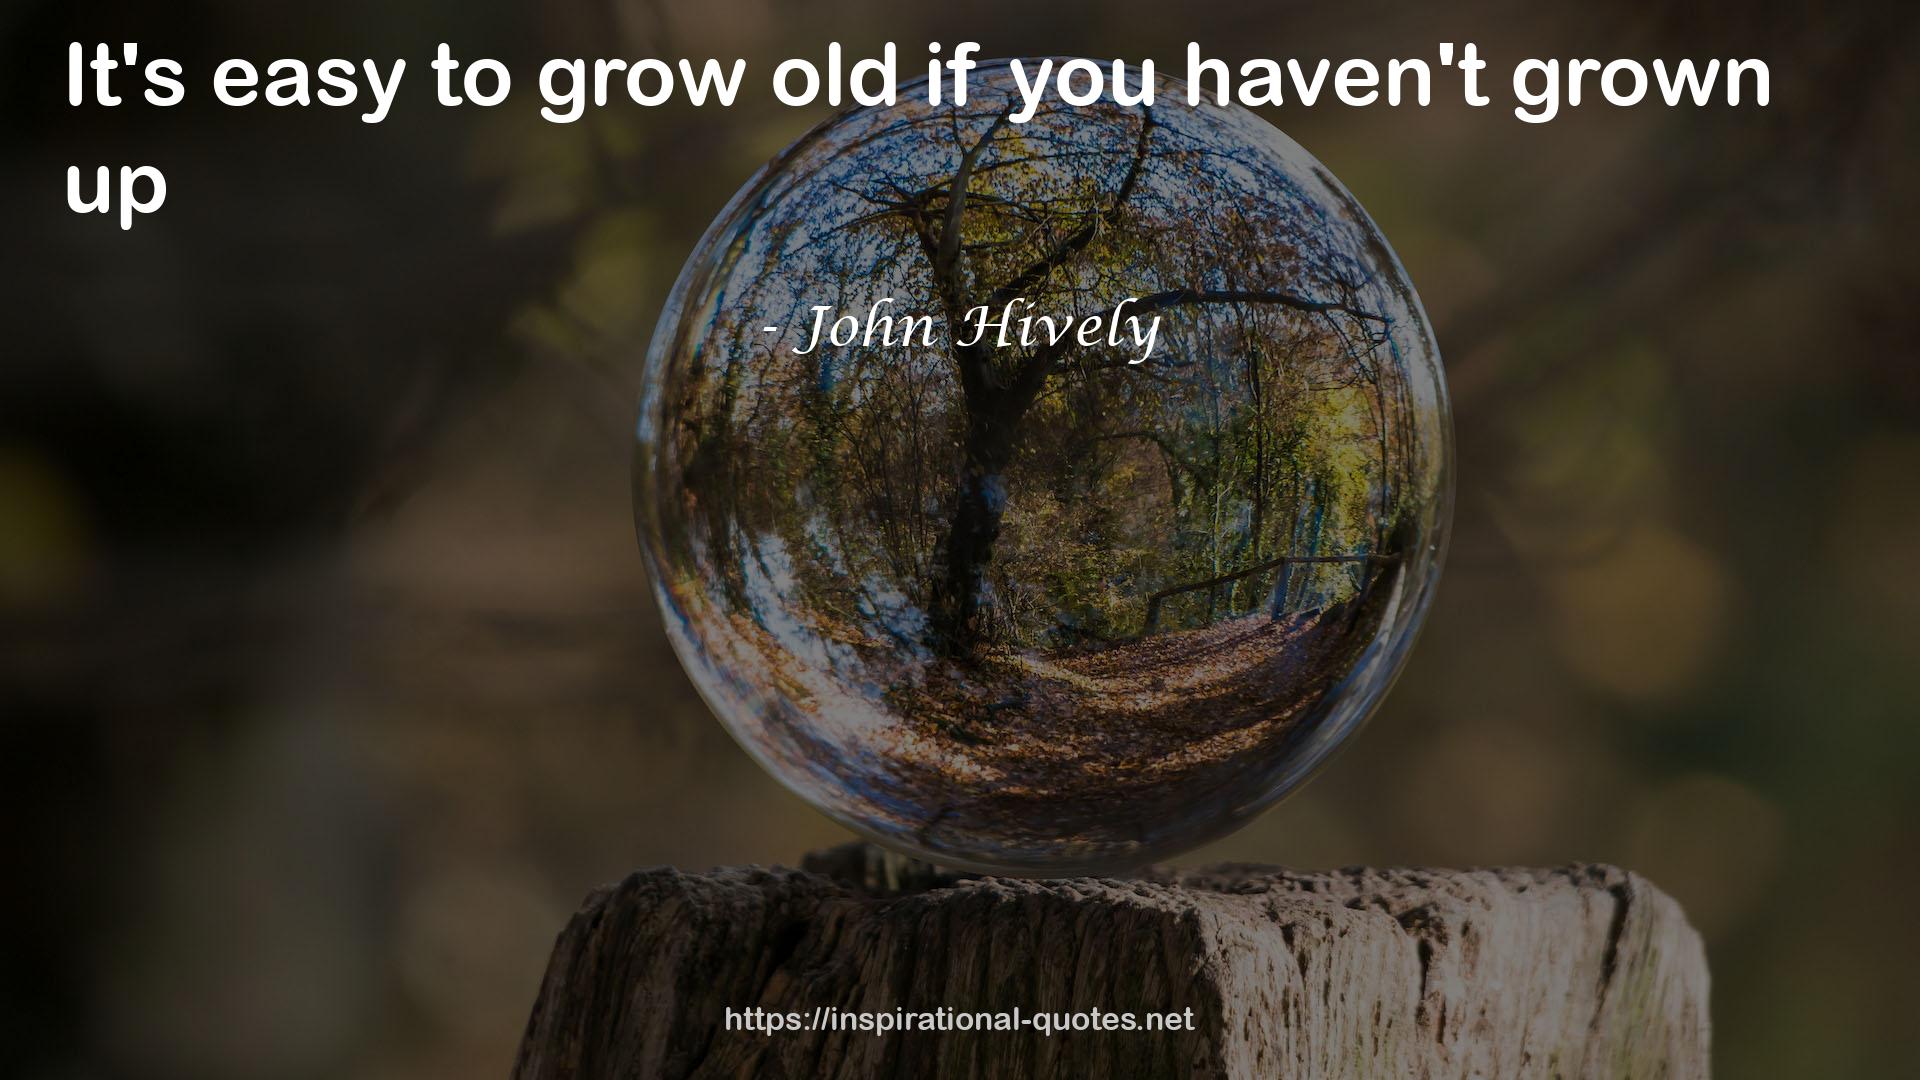 John Hively QUOTES